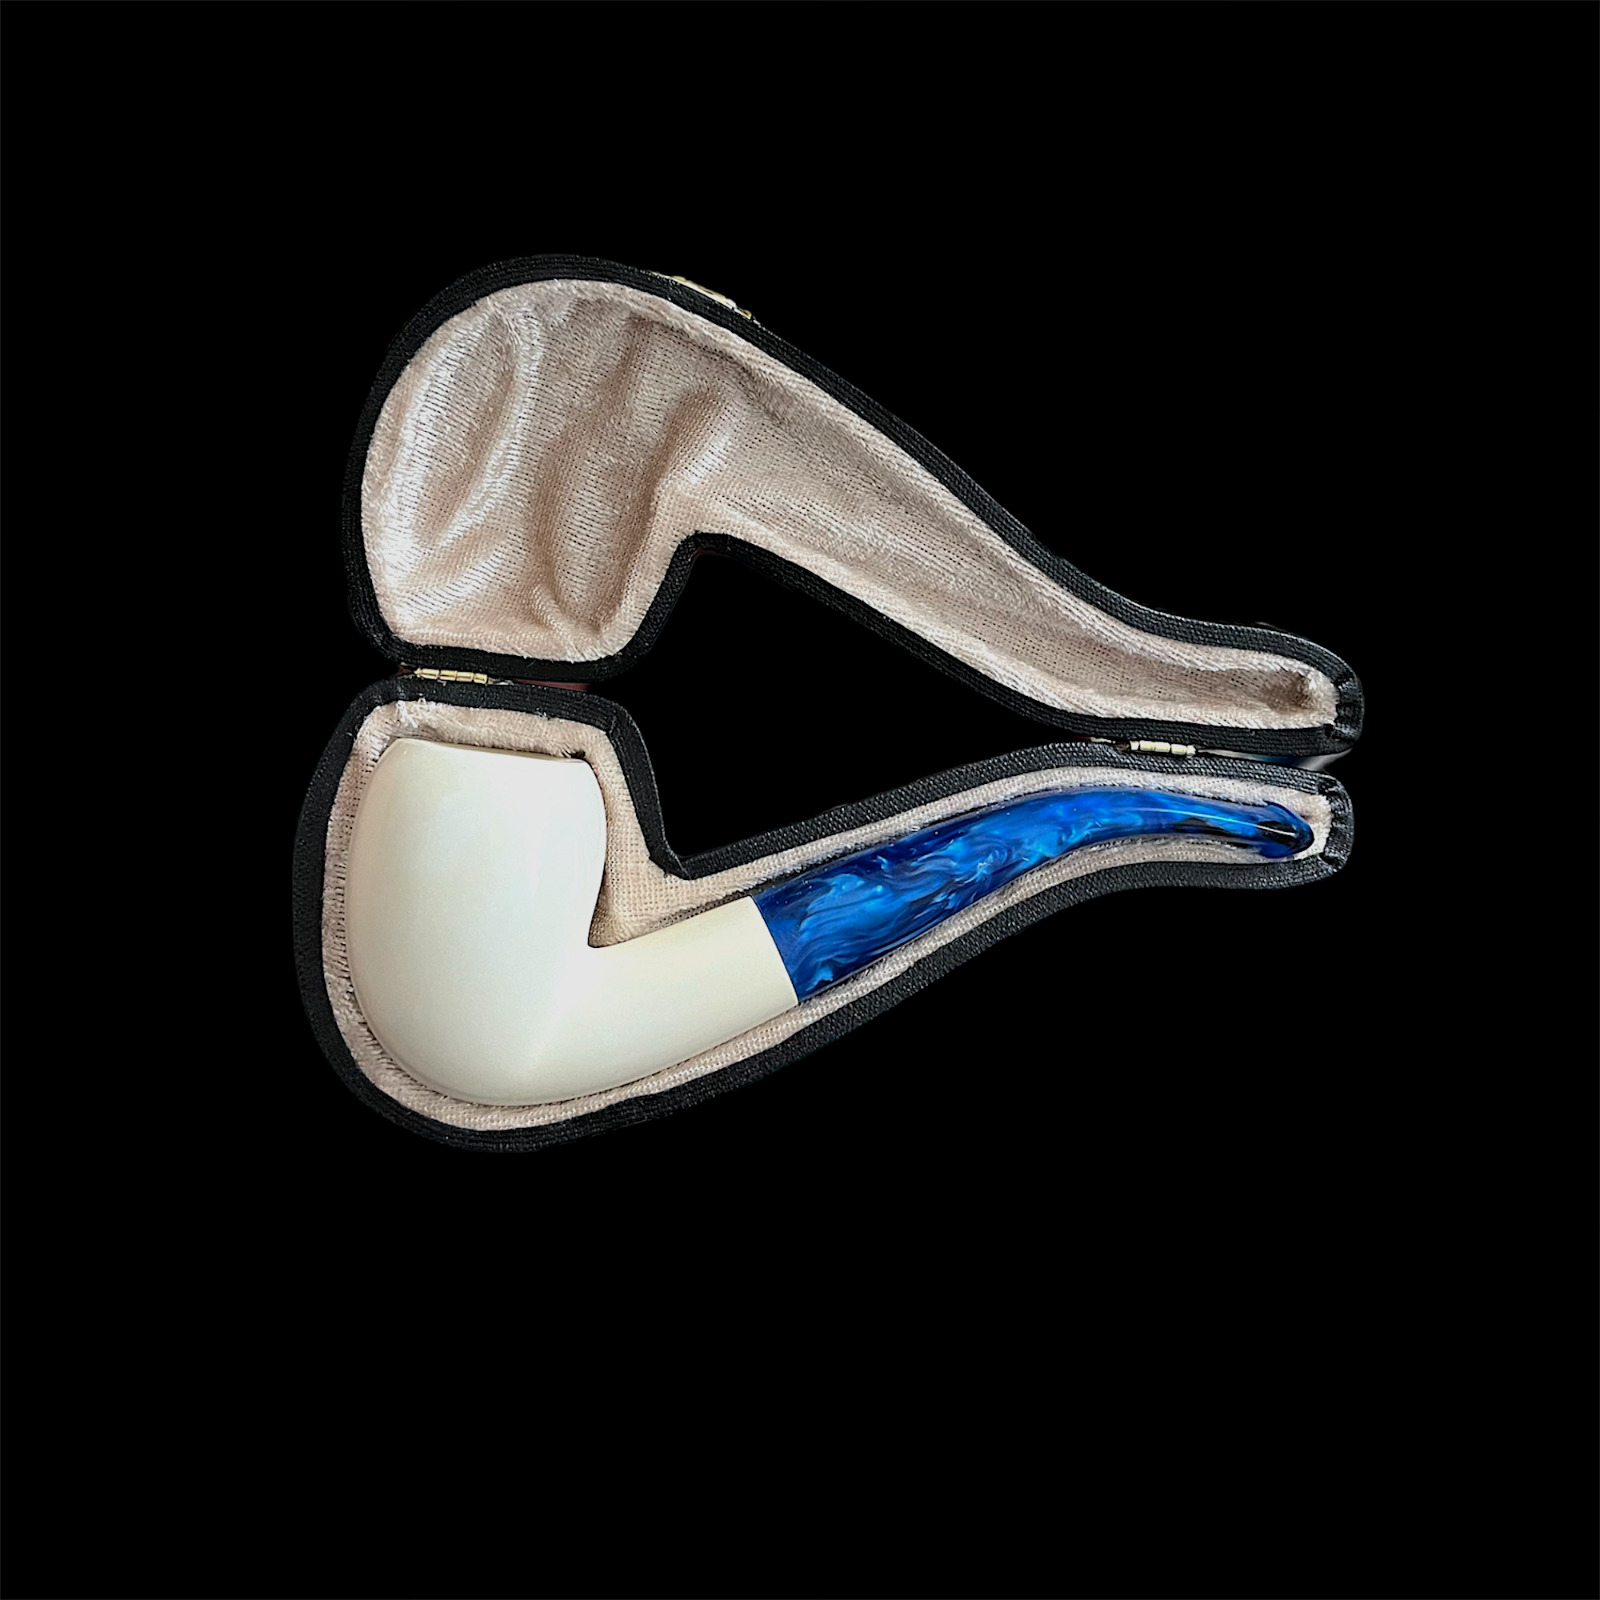 Block Meerschaum Pipe hand-carved unsmoked smoking tobacco pipe w case MD-394